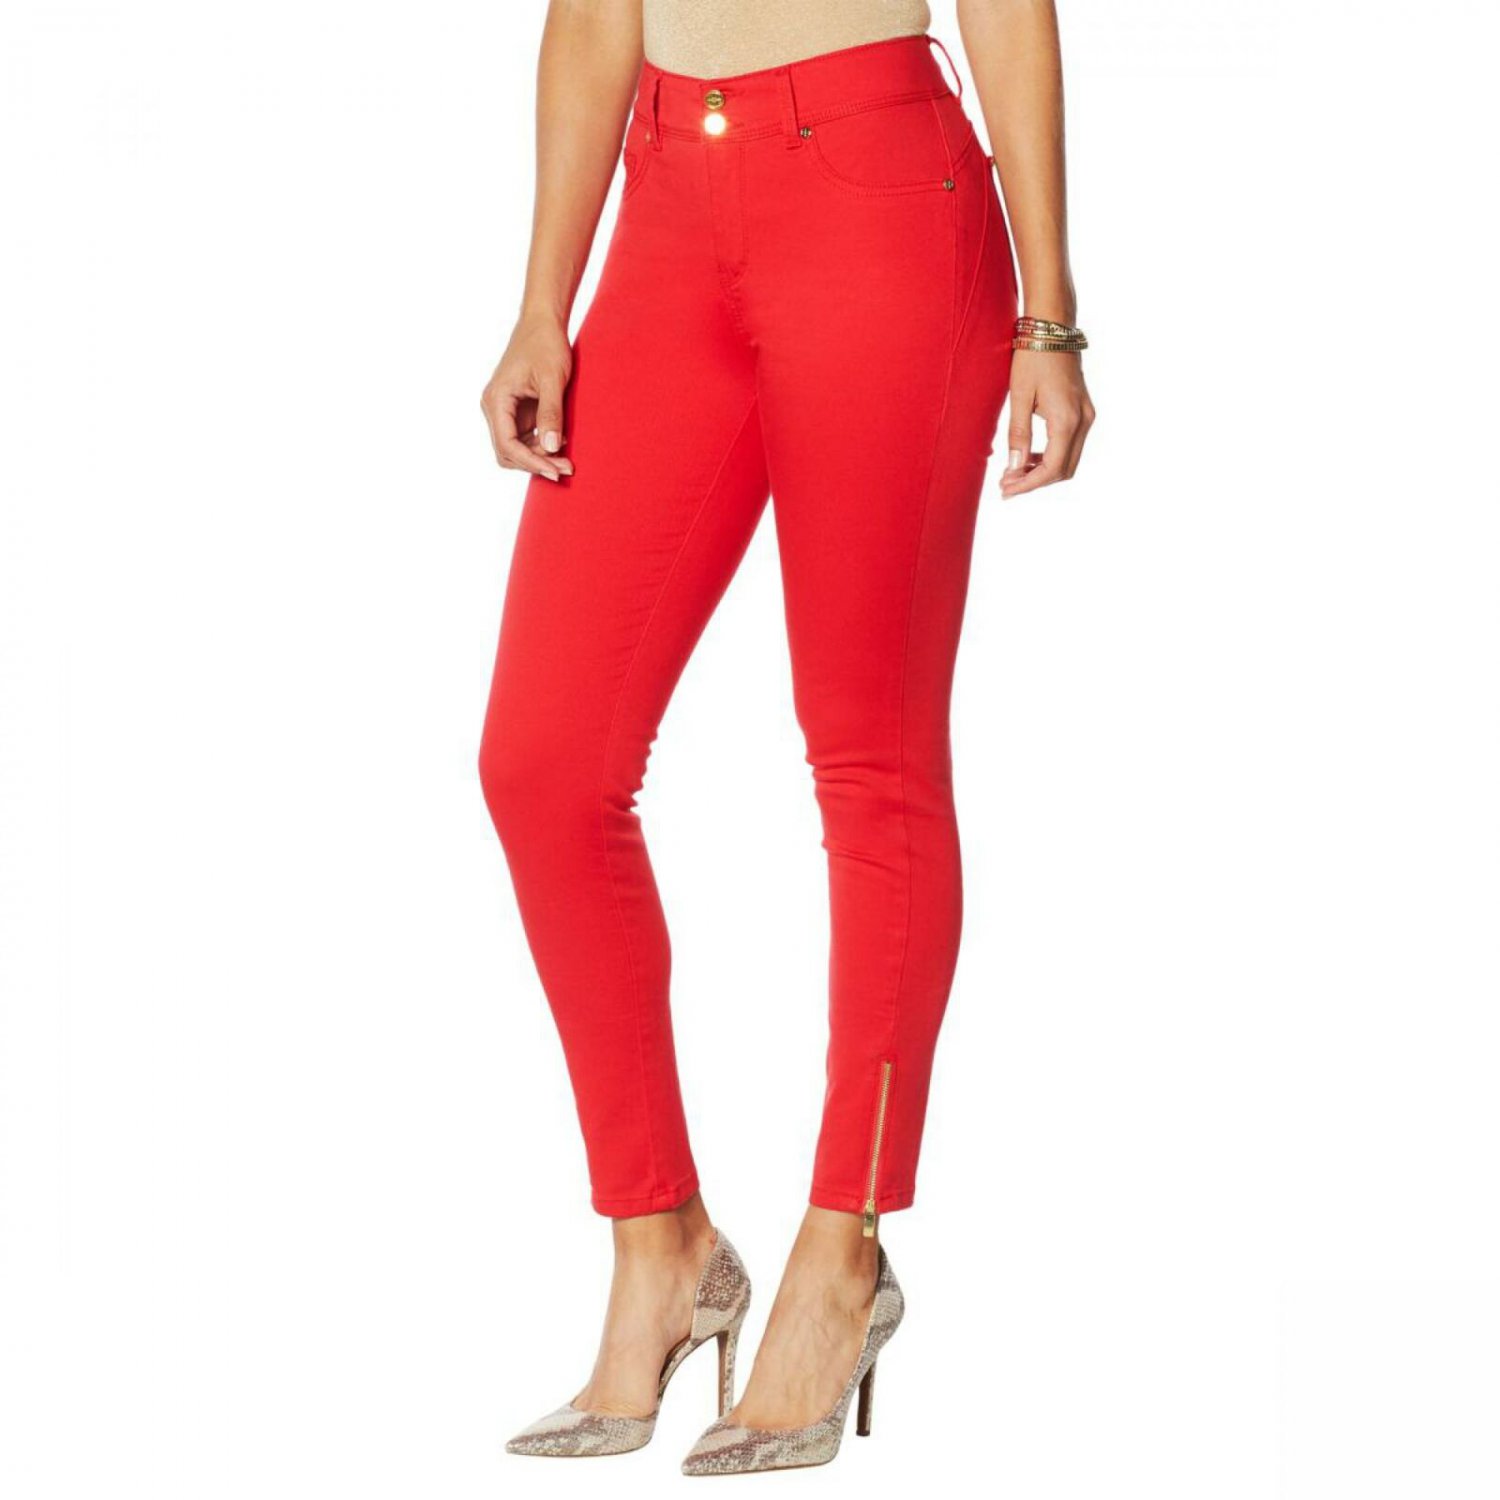 IMAN Women's City Chic 360 Slimming Skinny Jeans With Ankle Zippers 2 Red